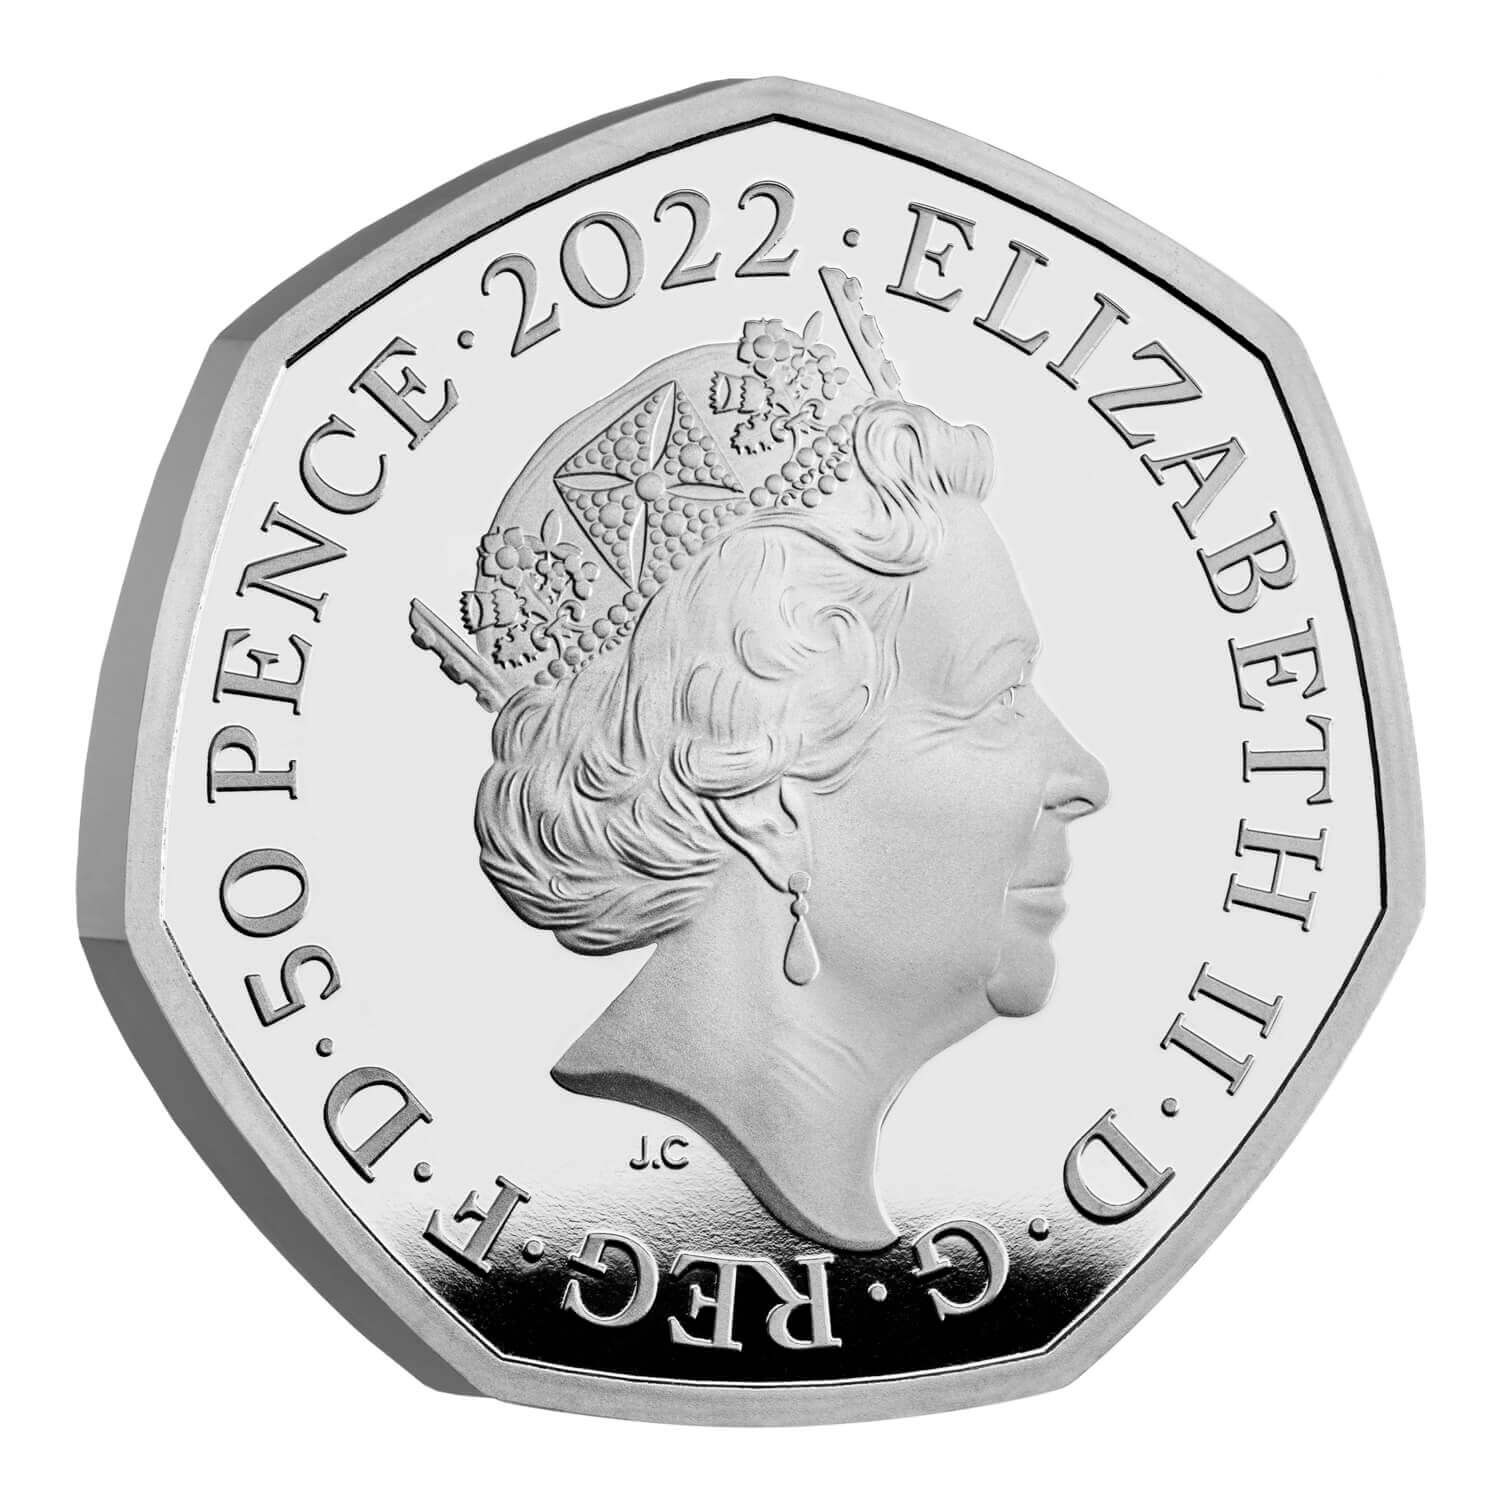 (W185.50.P.2022.UK22SMSP) 50 Pence The Snowman 2022 - Proof silver Obverse (zoom)